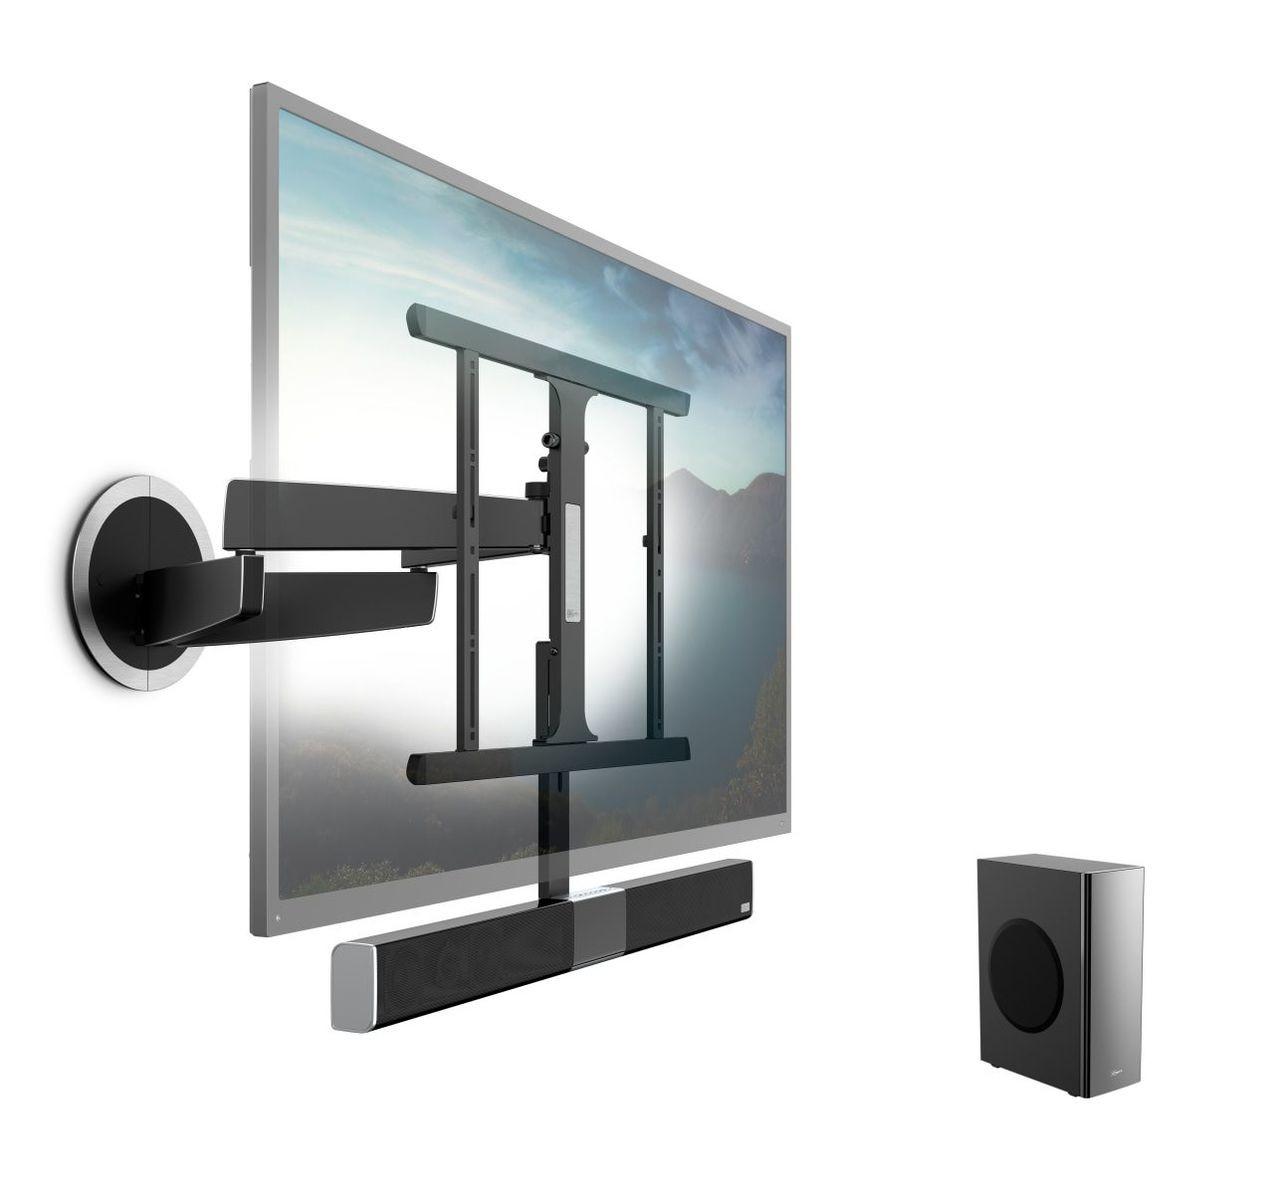 An image of Vogel's SoundMount Full-Motion TV Wall Mount with Integrated Sound